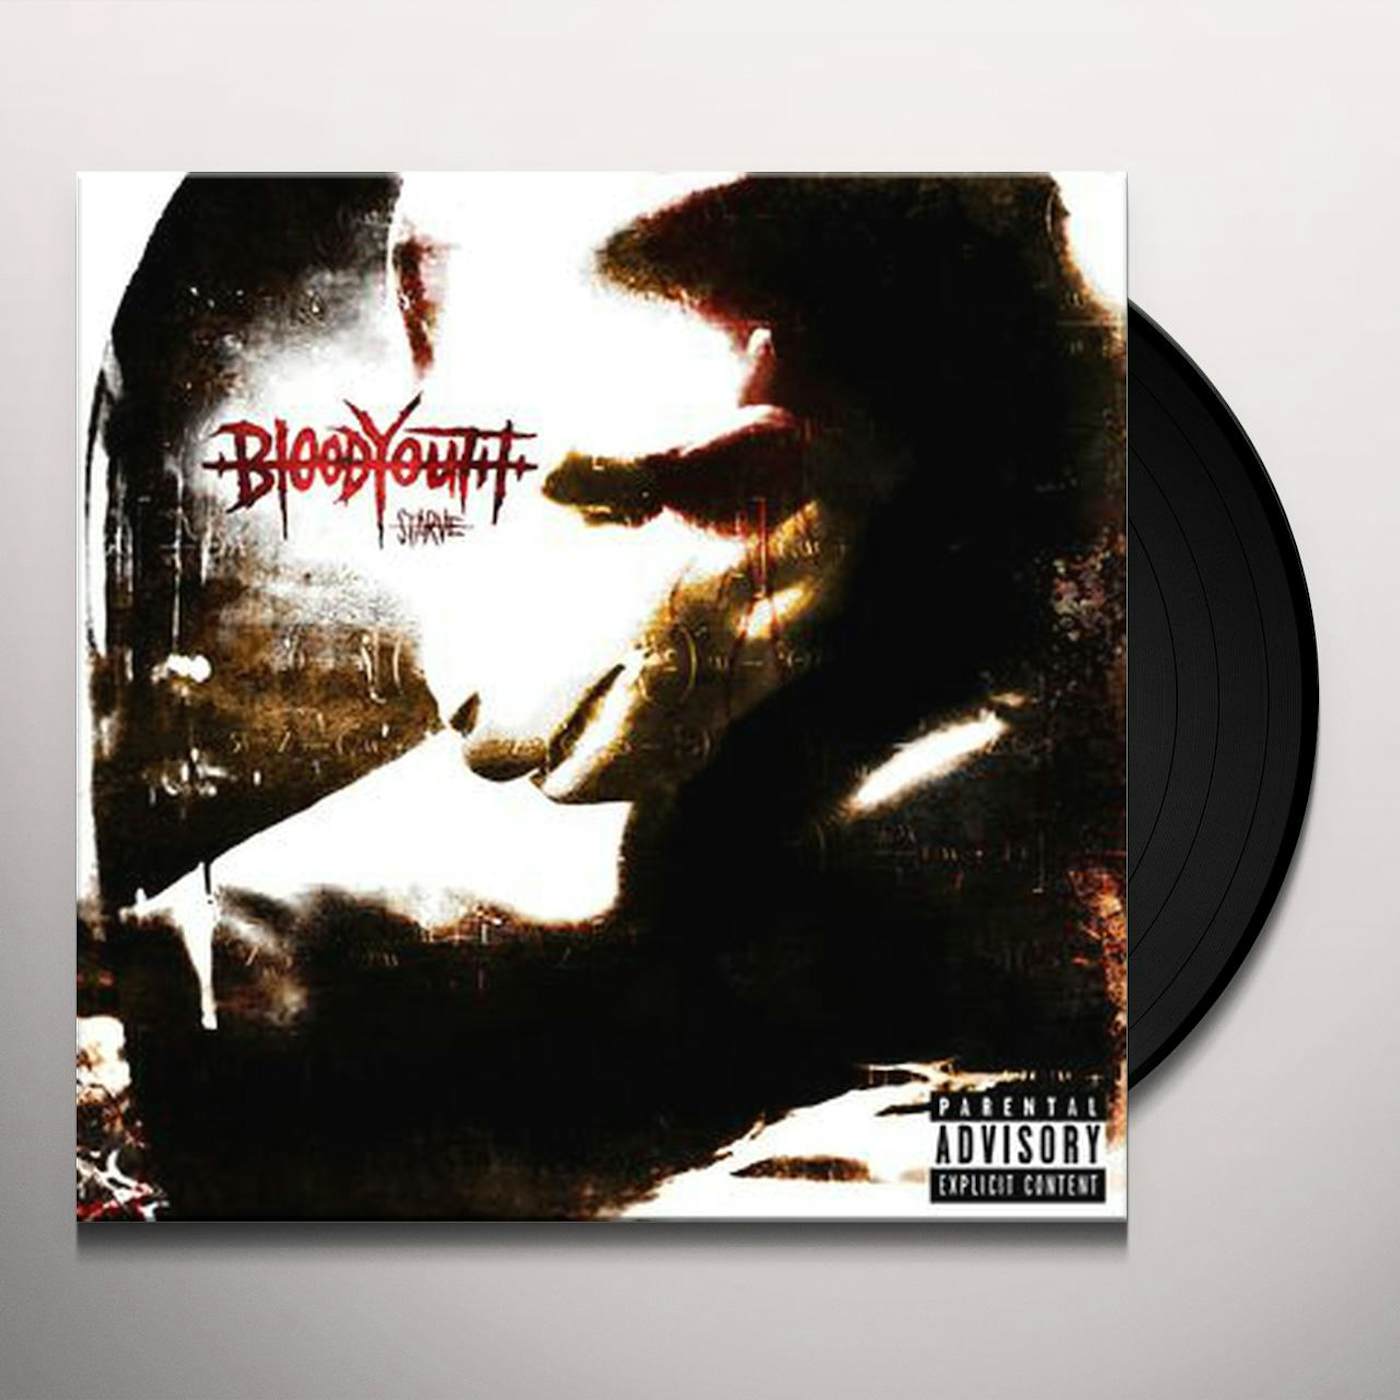 Blood Youth Starve Vinyl Record